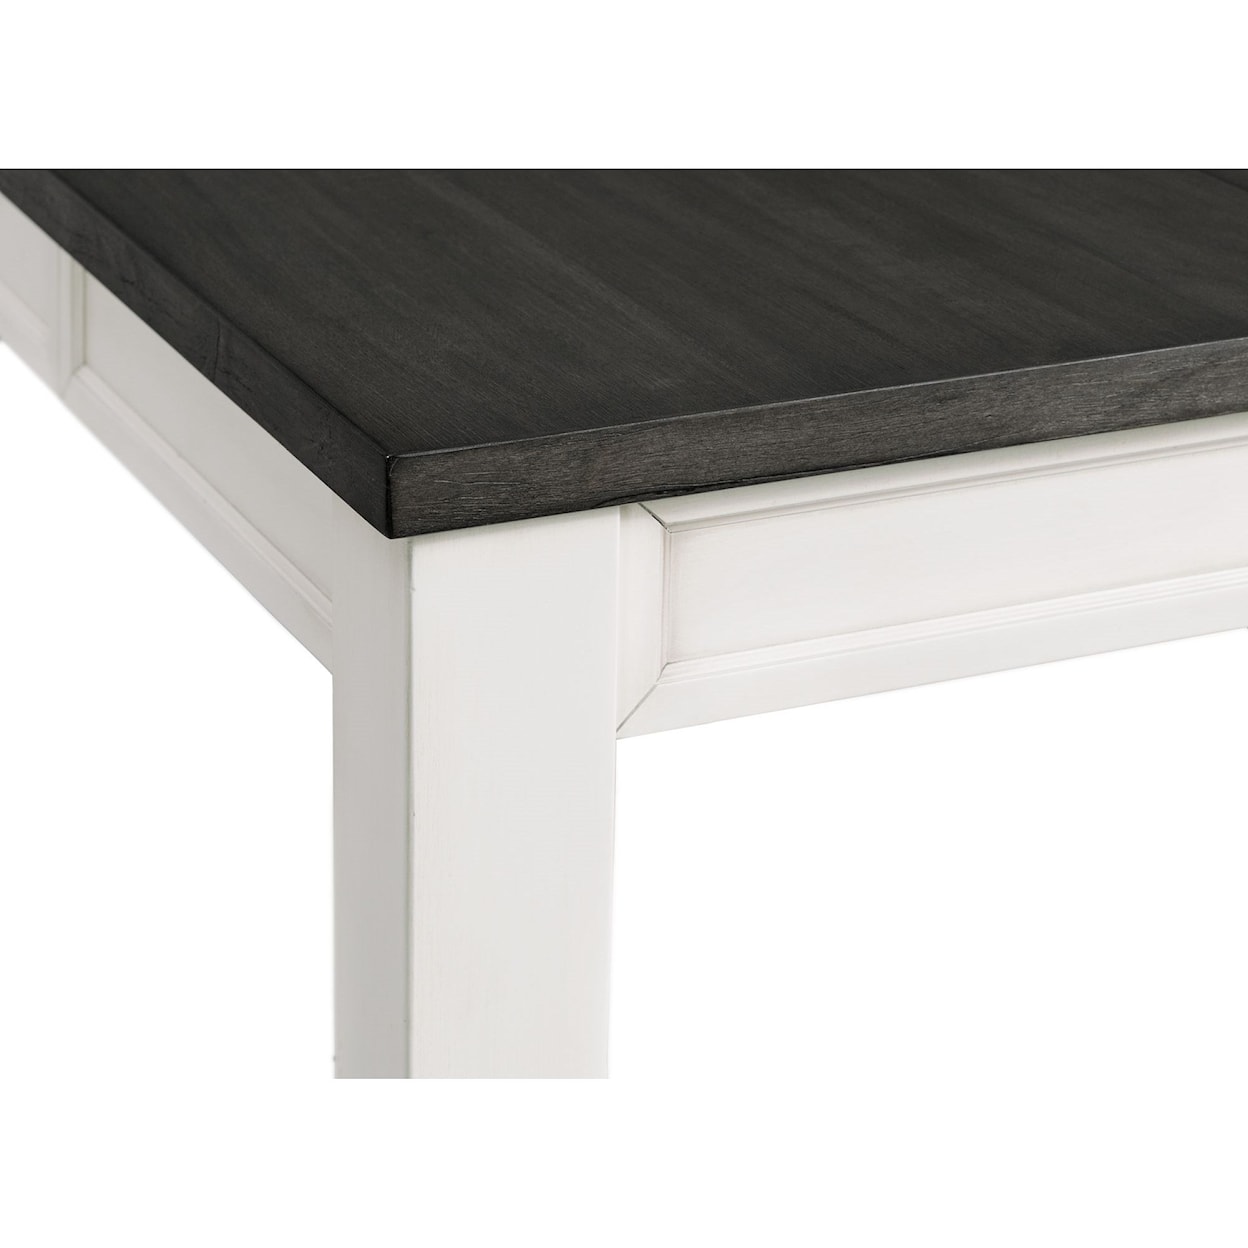 Elements International Kayla Two-Tone Counter Height Dining Table